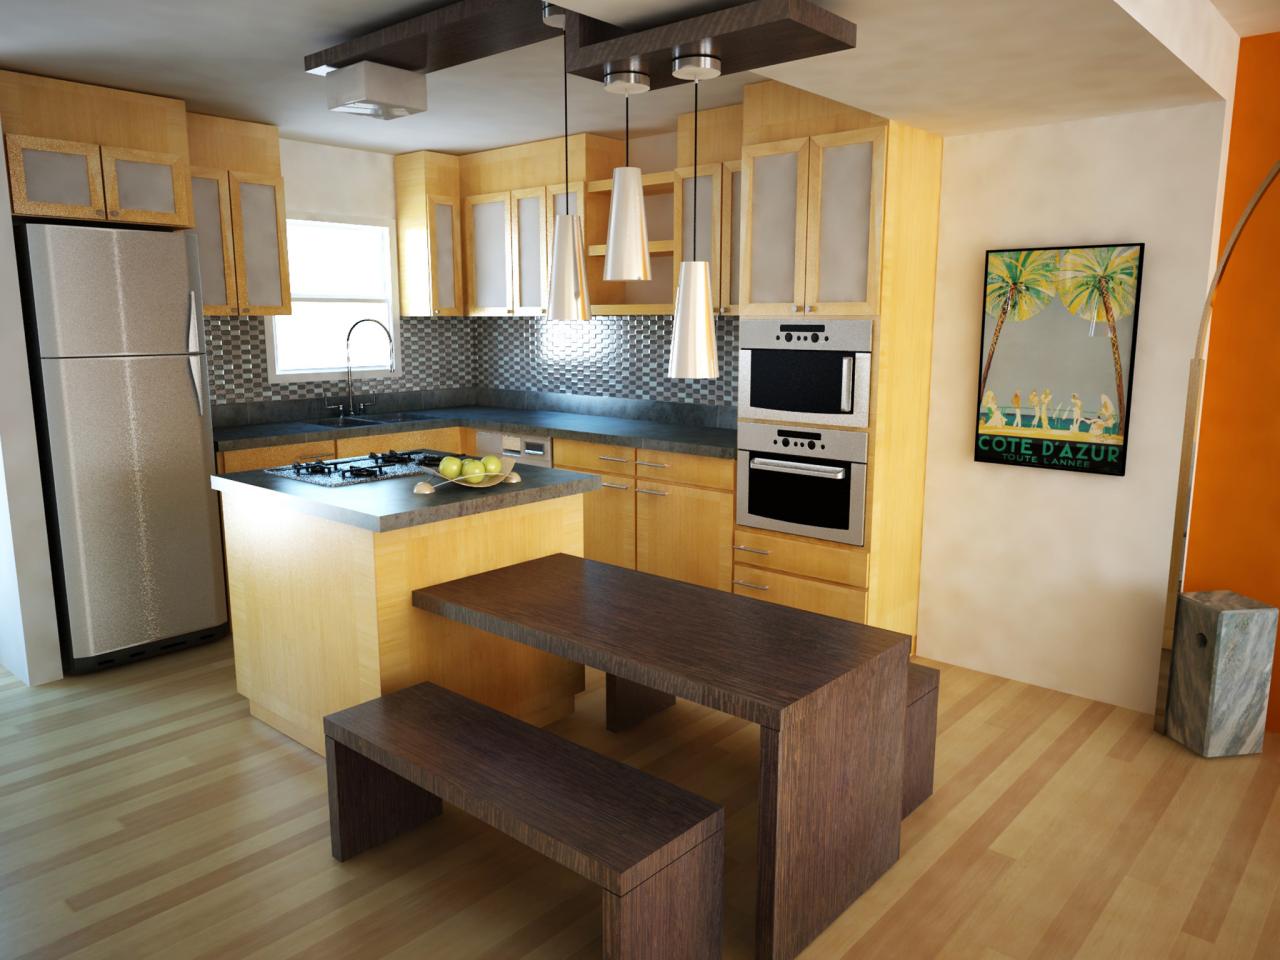 Small Kitchen Layouts Pictures Ideas Tips From Hgtv Hgtv,Small 2 Bedroom Apartment Layout